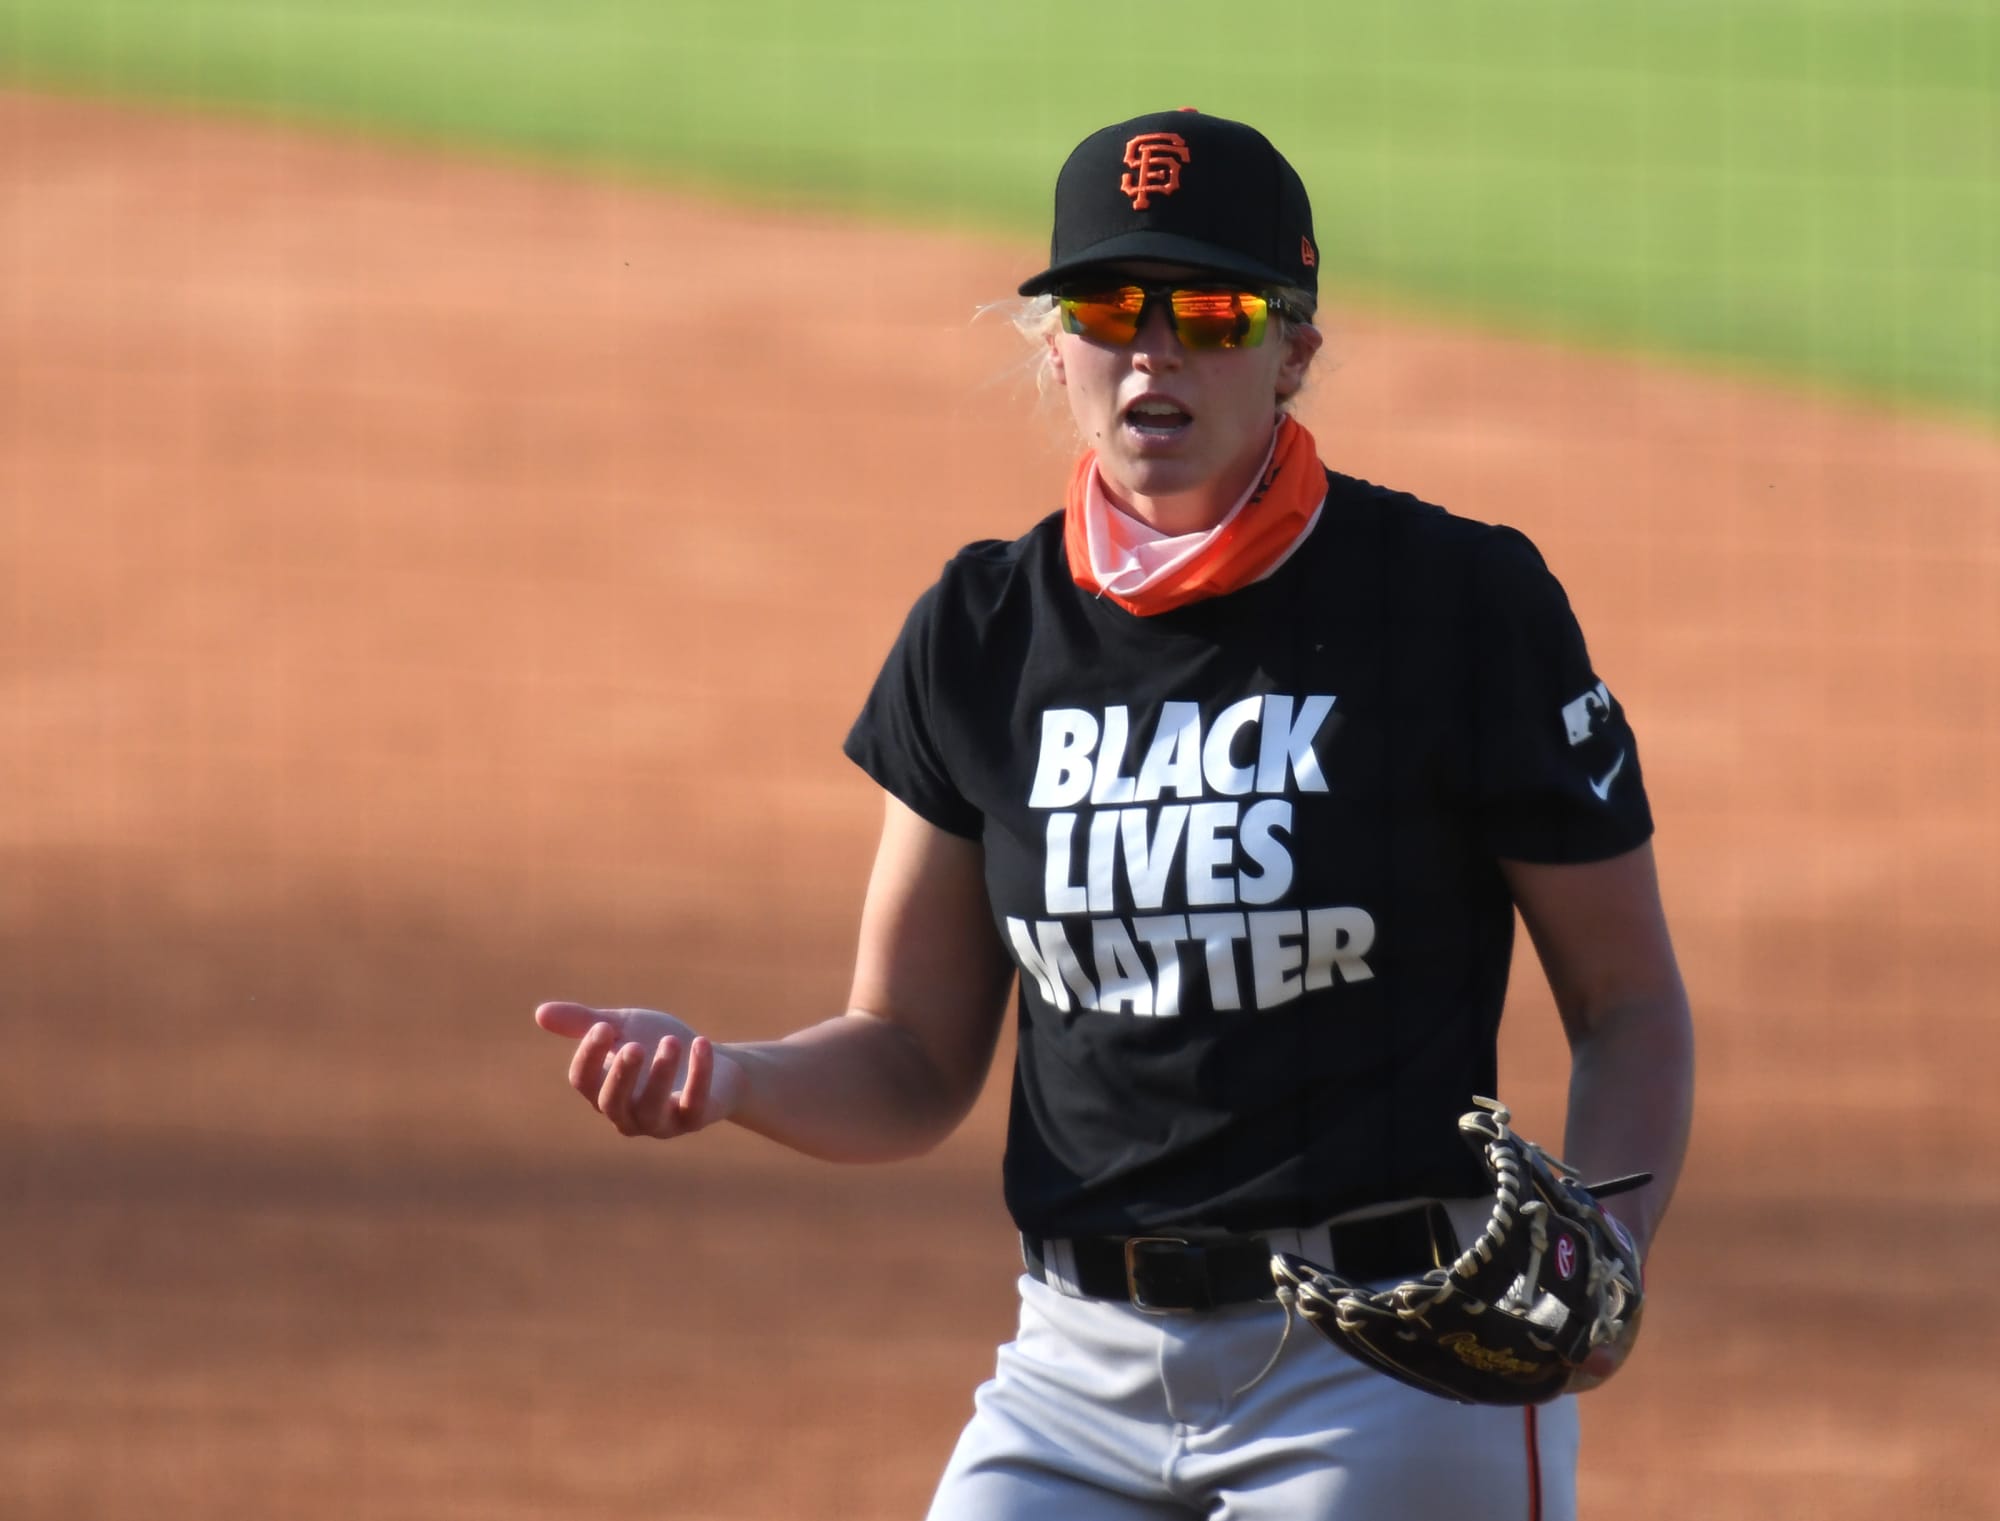 San Francisco Giants coach Alyssa Nakken is officially in the Hall of Fame